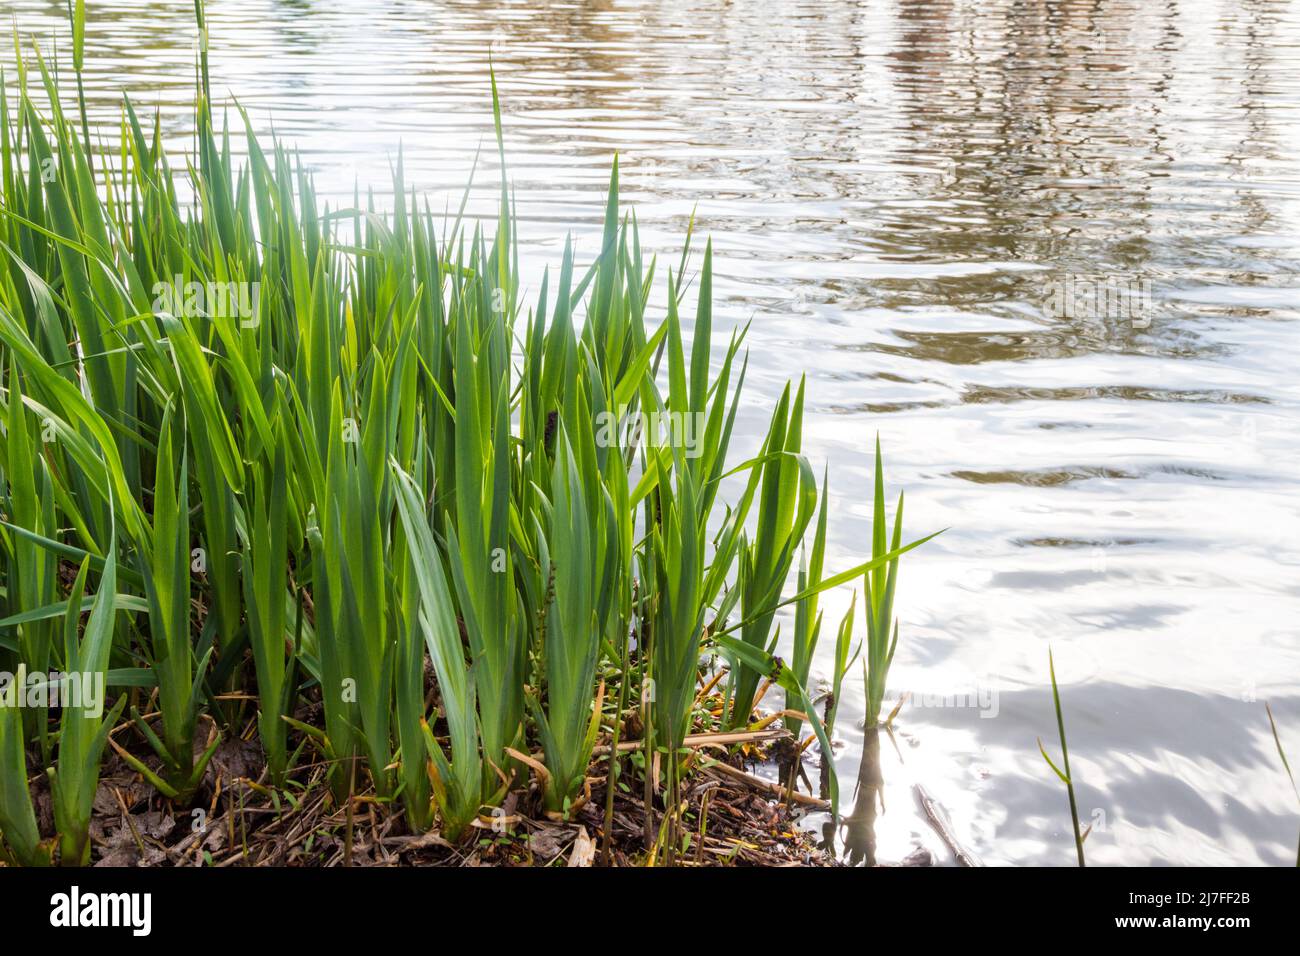 Sweet flag, sway or muskrat root (Acorus calamus) plant next to pond water in spring, Hungary, Europe Stock Photo